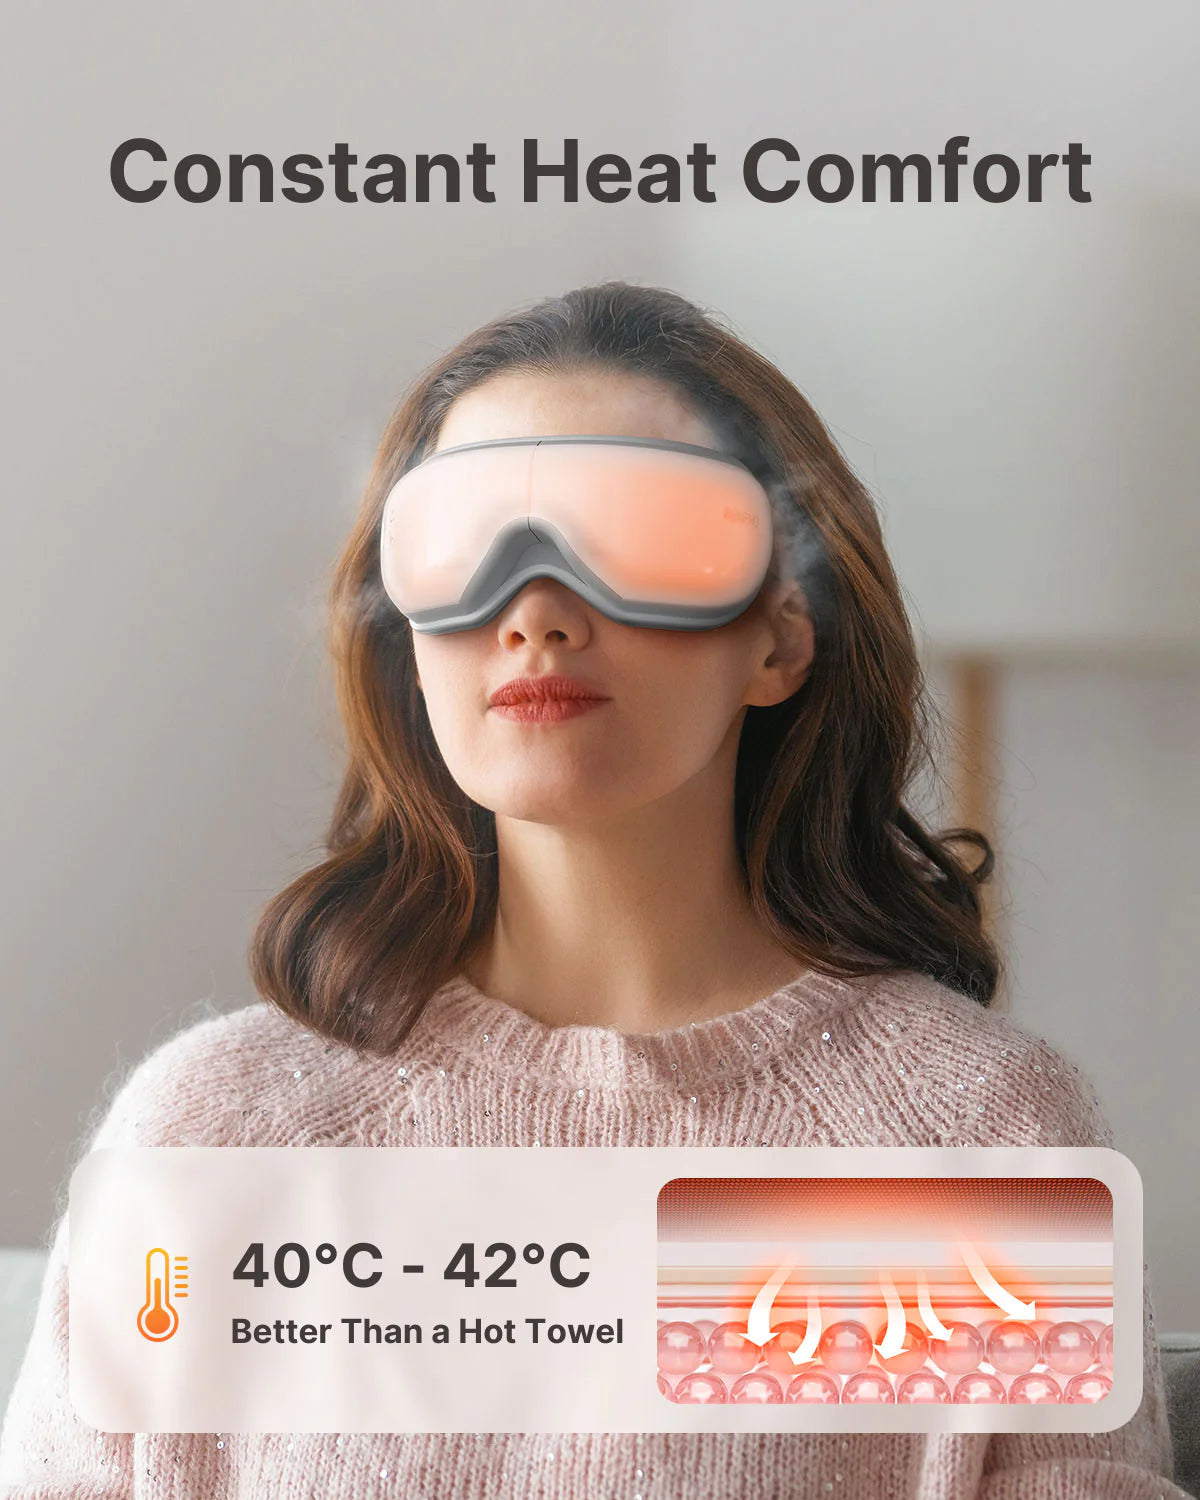 Woman in a pink sweater wearing a white Renpho EU Eyeris 1 Eye Massager with an infographic displaying temperature range (40°c - 42°c) and benefits compared to a hot towel, enhancing the theme.